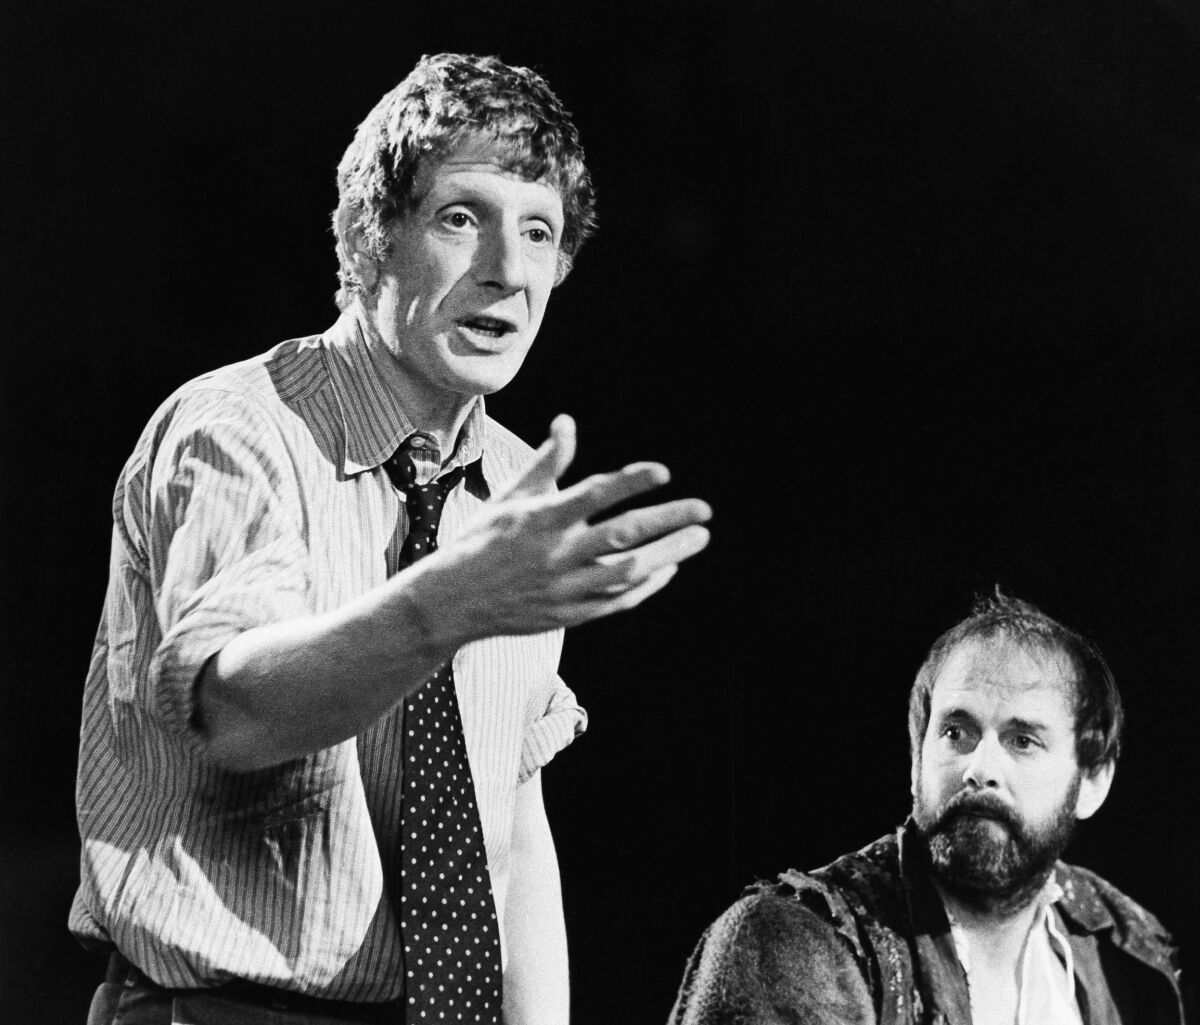 Jonathan Miller directs "Taming of the Shrew" with actor John Cleese